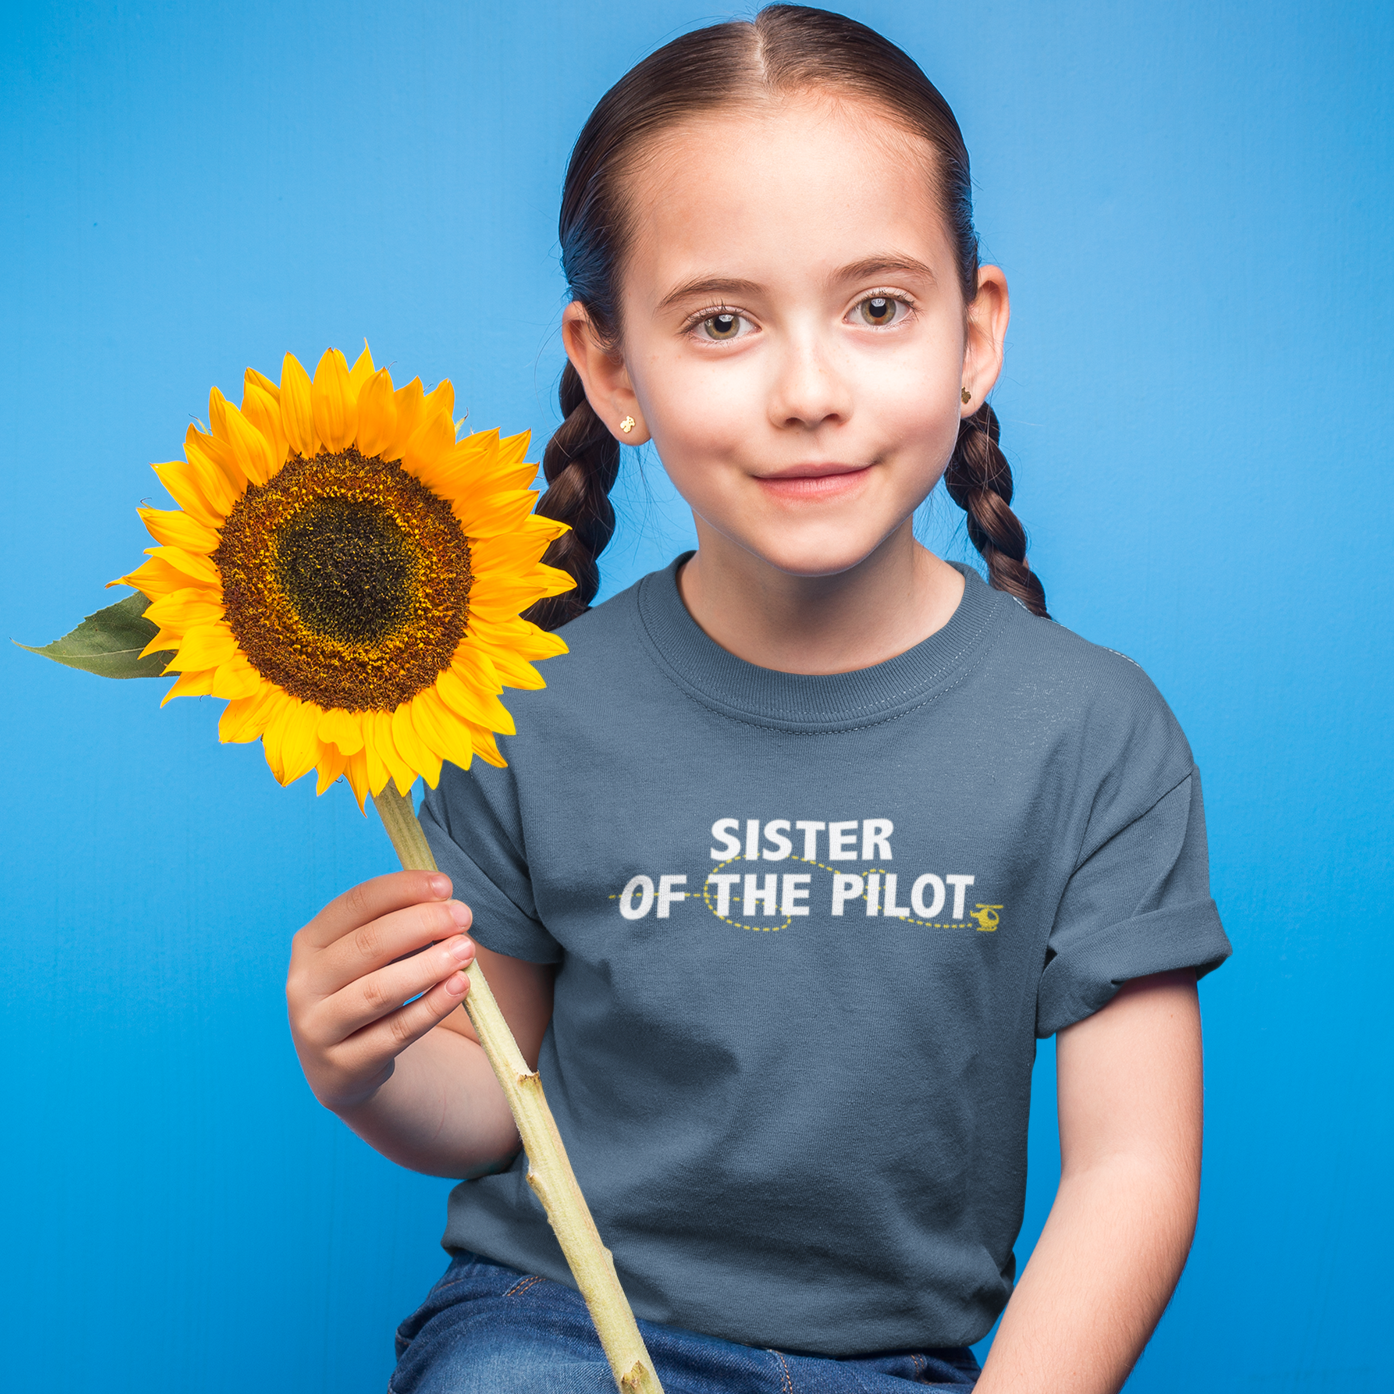 Sister of the/a Pilot - Baby & Toddler T-shirts